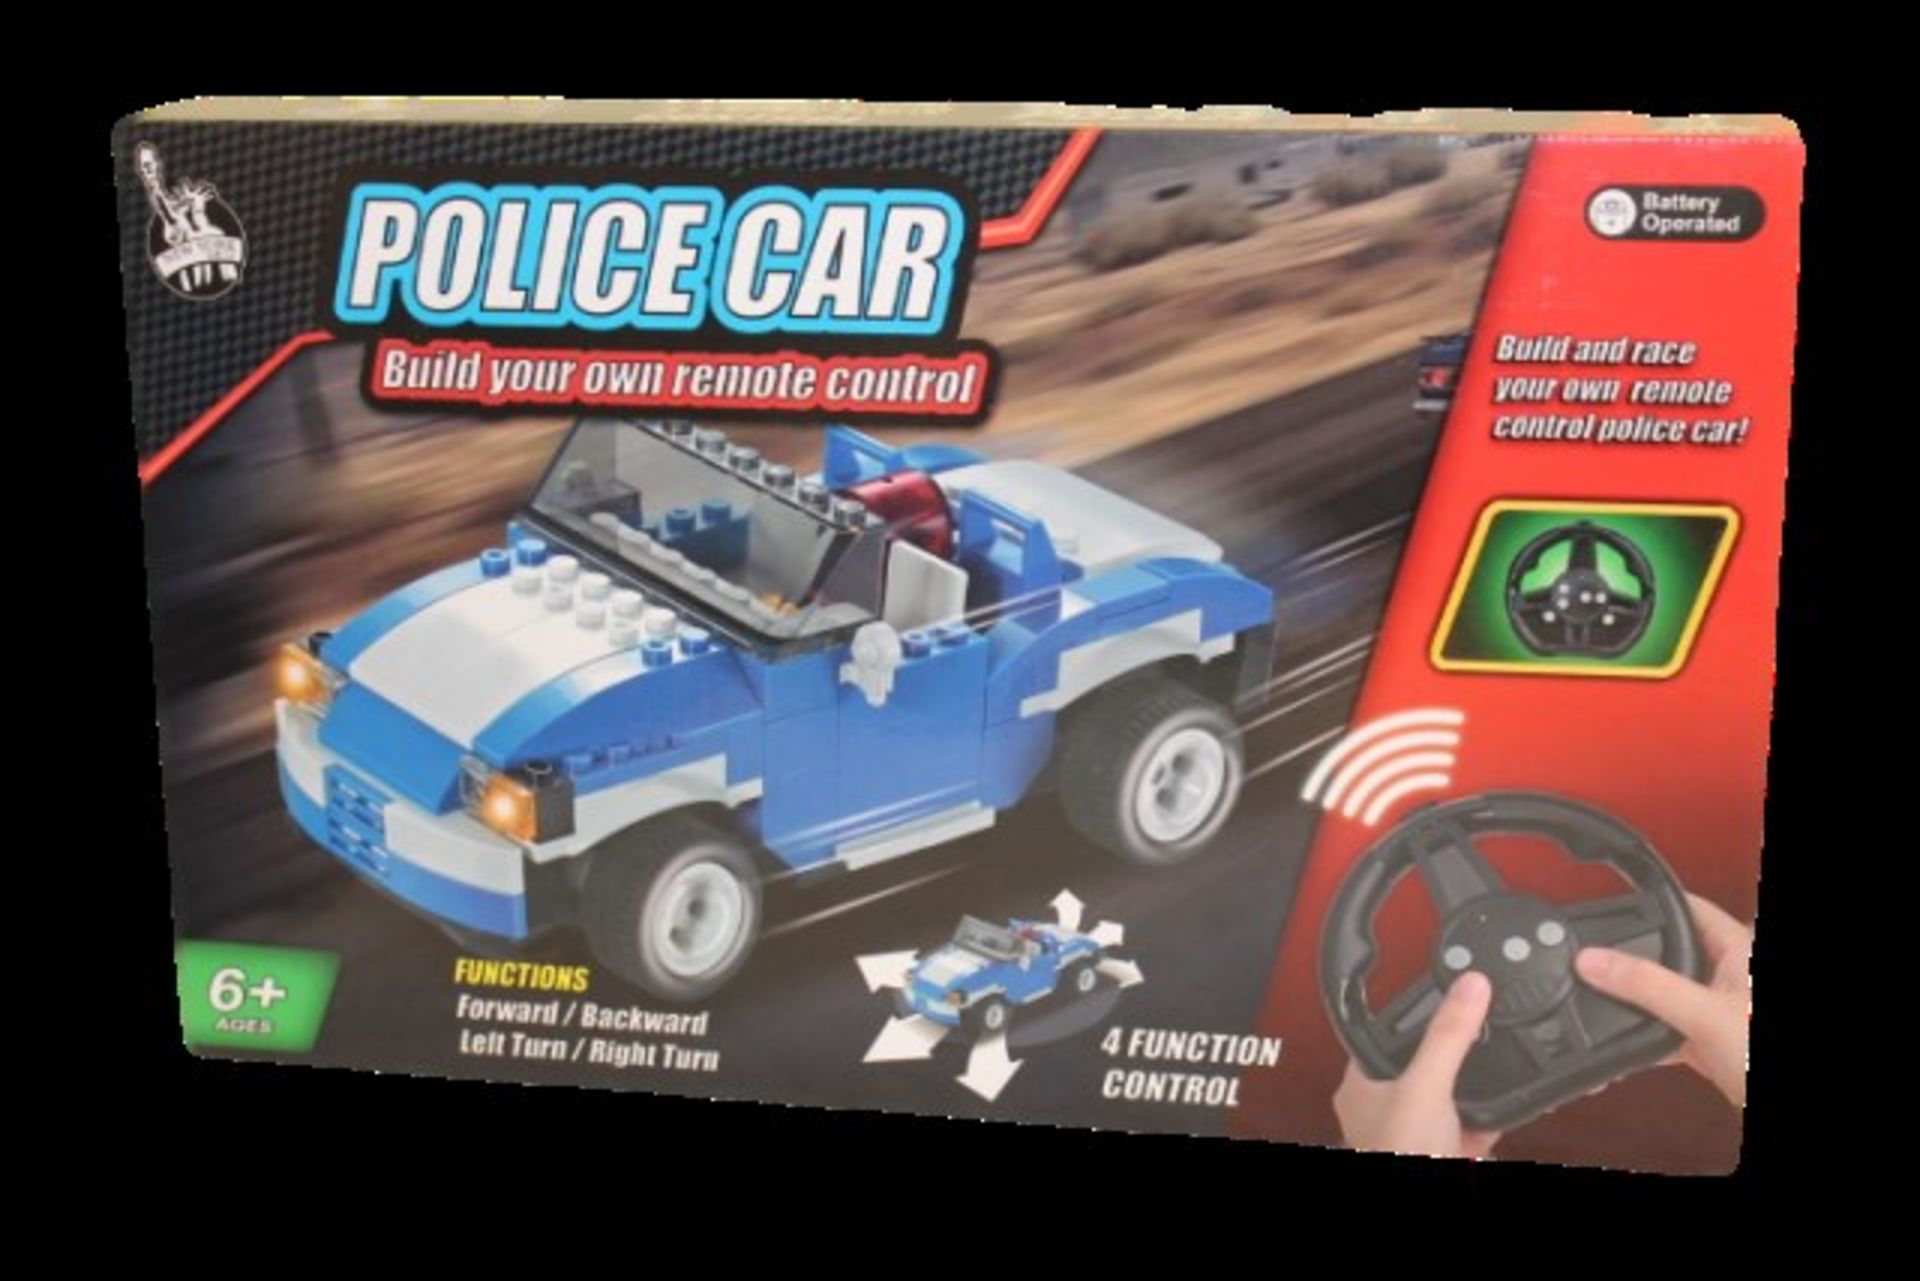 V Brand New Radio Controlled Build your own Police Car Full function r/c Matches Lego RRP £49.99